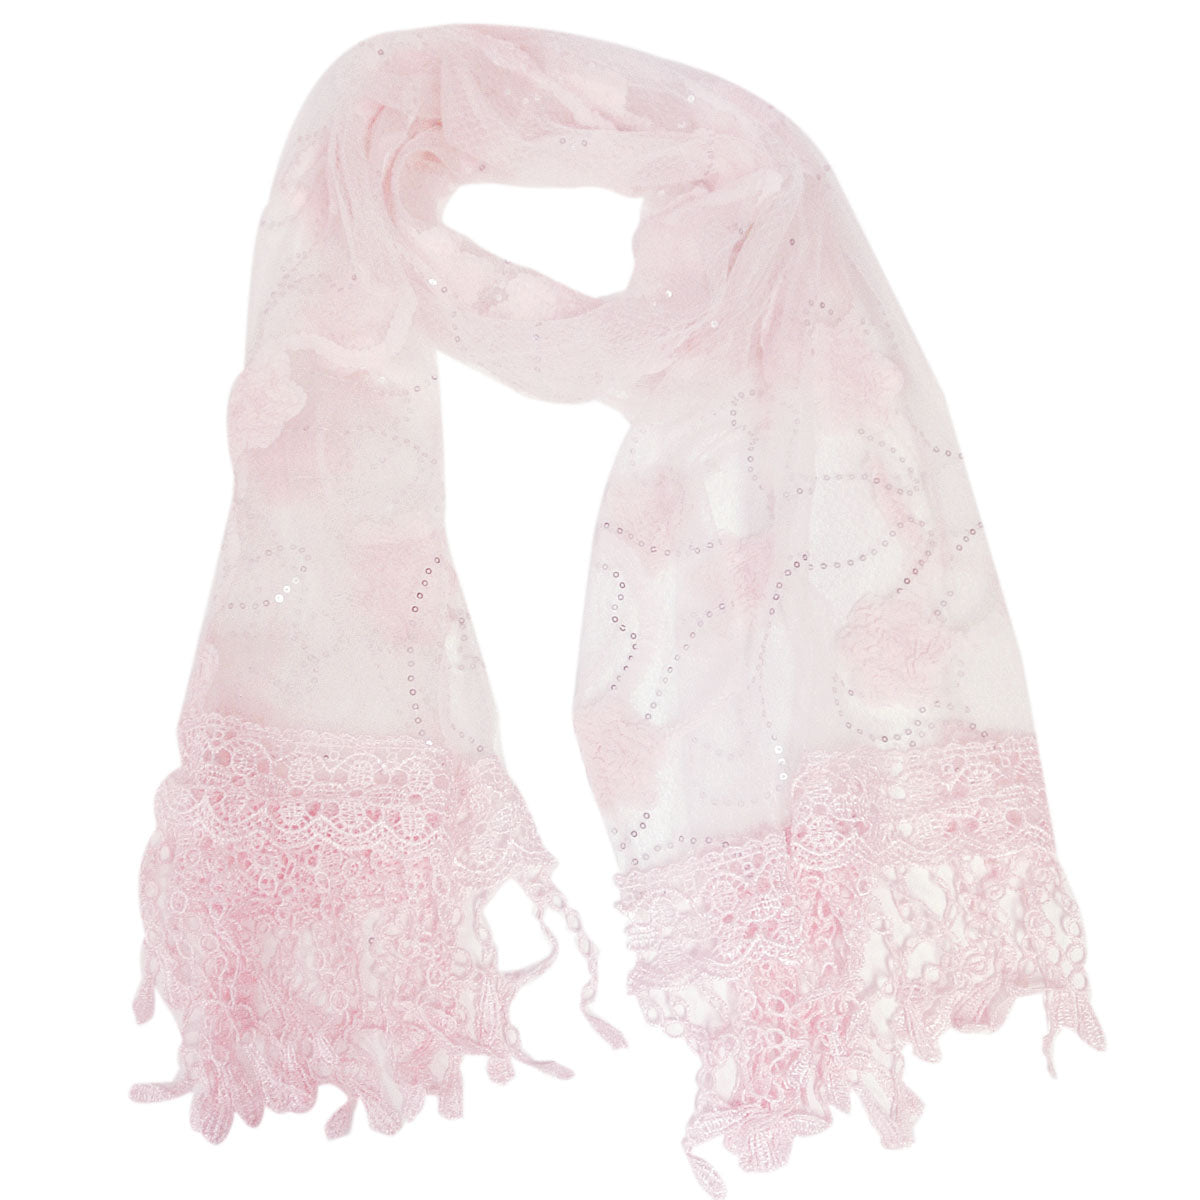 Wrapables Romantic Dream Floral Lace Long Scarf with Tassel Trim